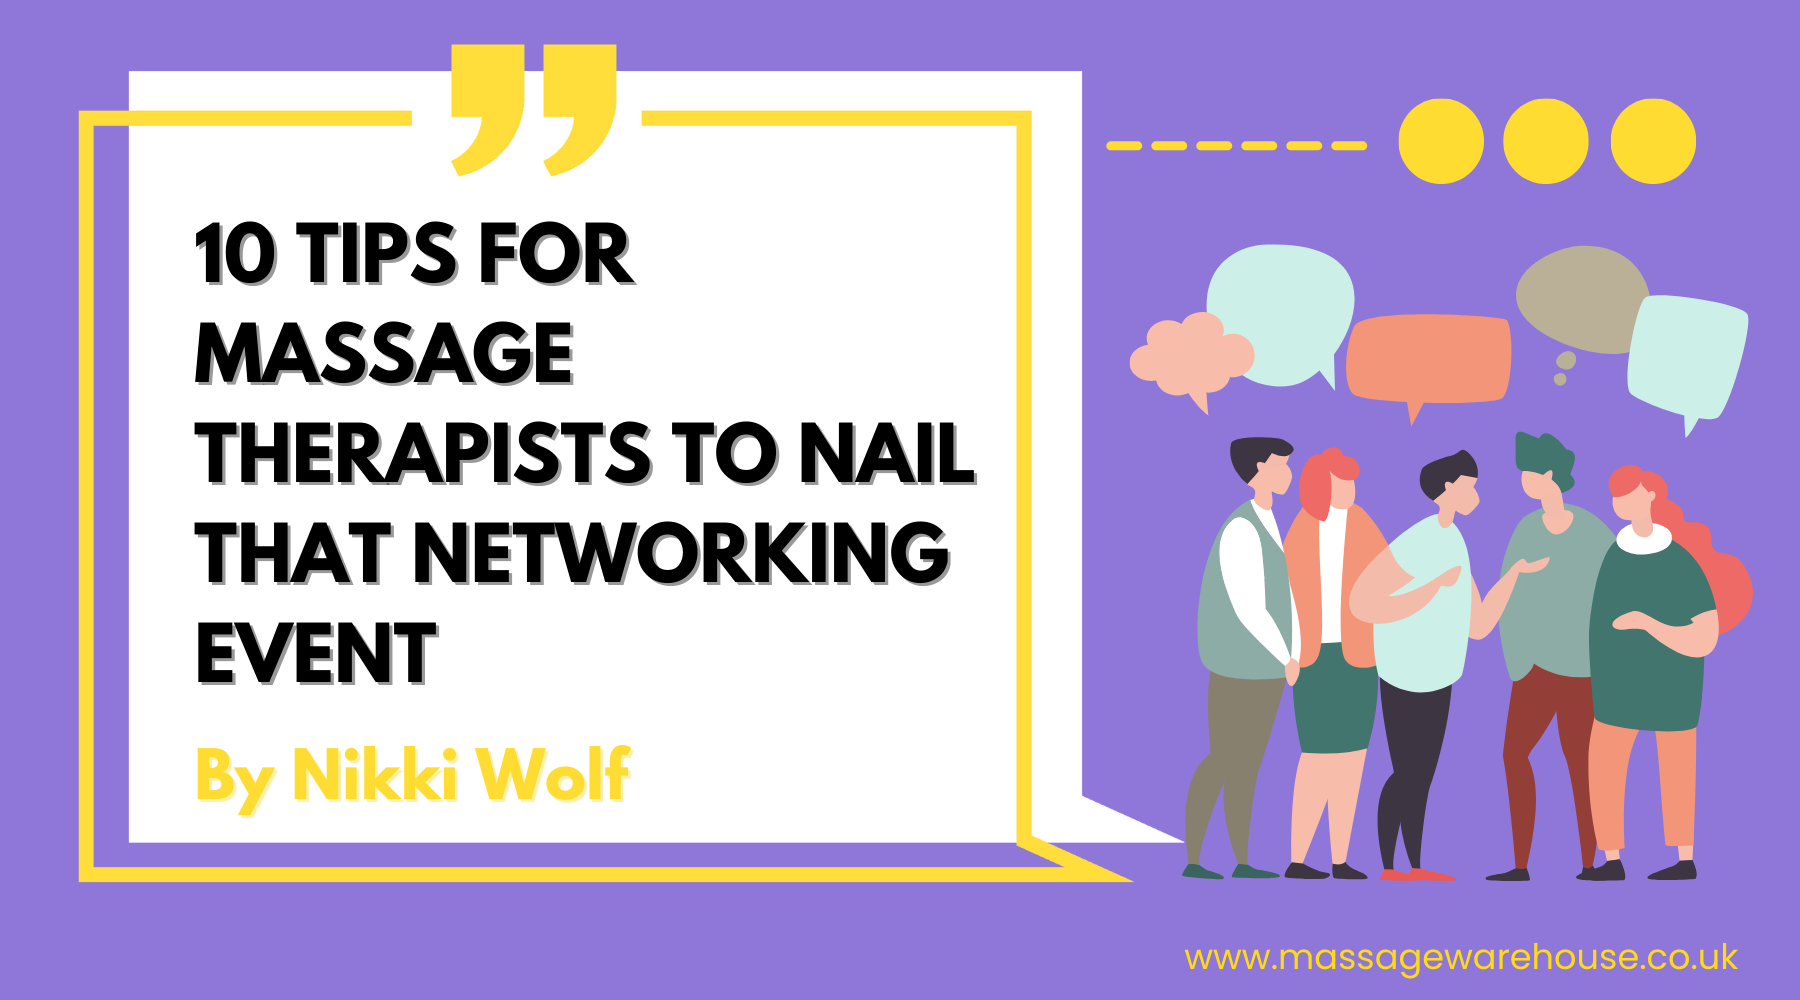 10 Tips for Massage Therapists to Nail That Networking Event